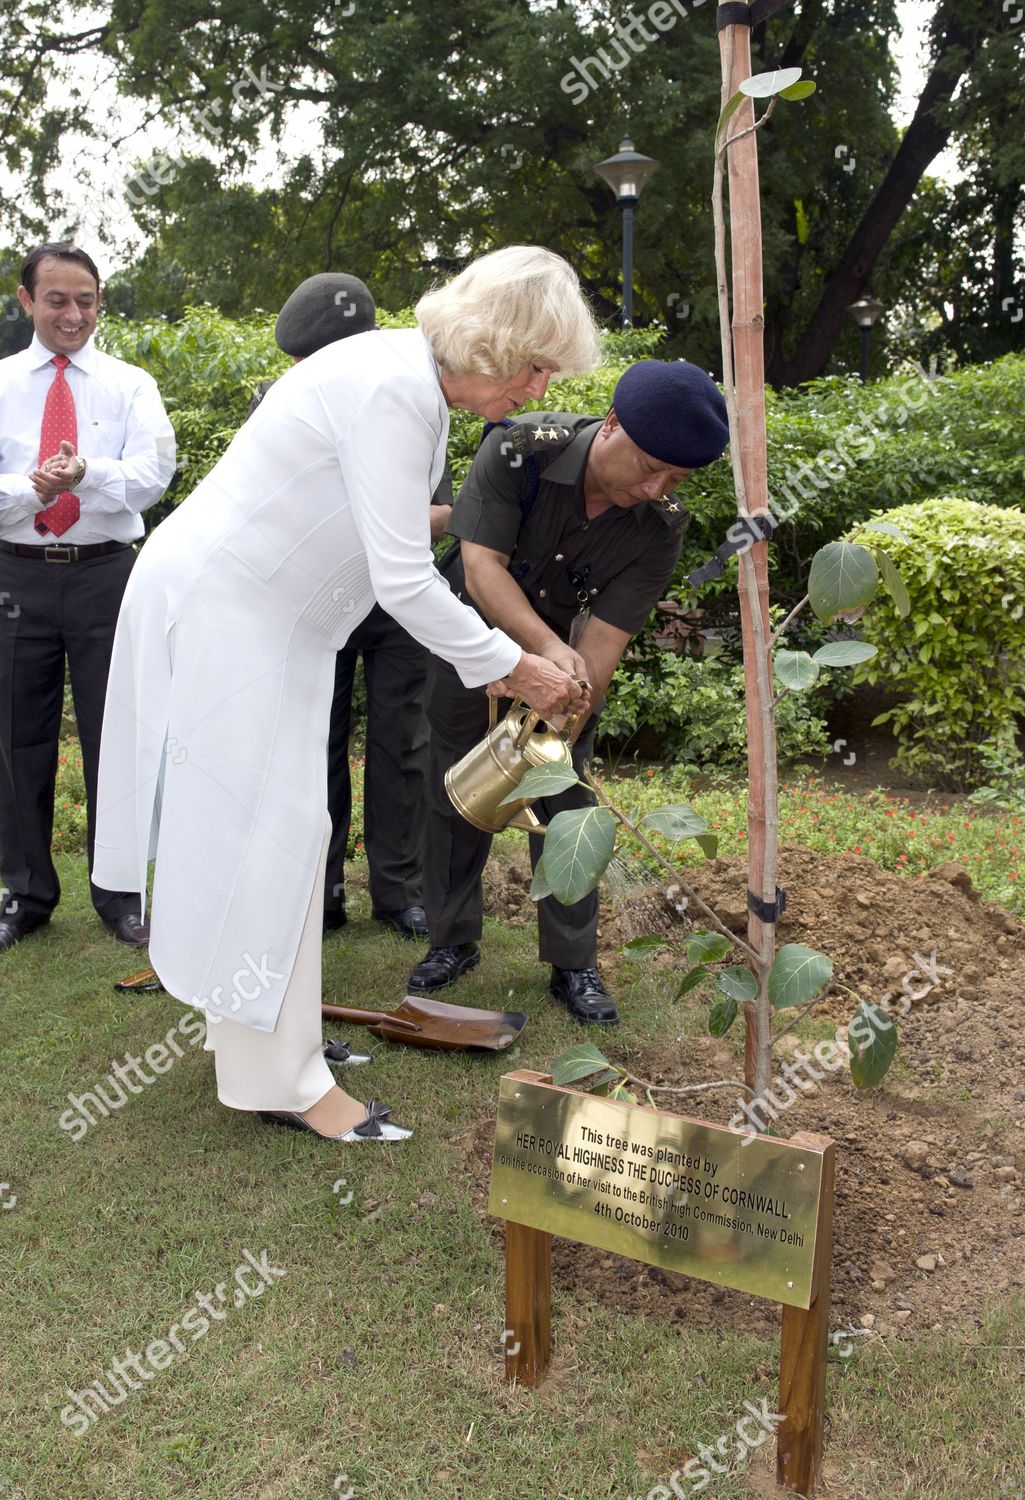 prince-charles-and-camilla-duchess-of-cornwall-visit-to-india-shutterstock-editorial-1229651g.jpg